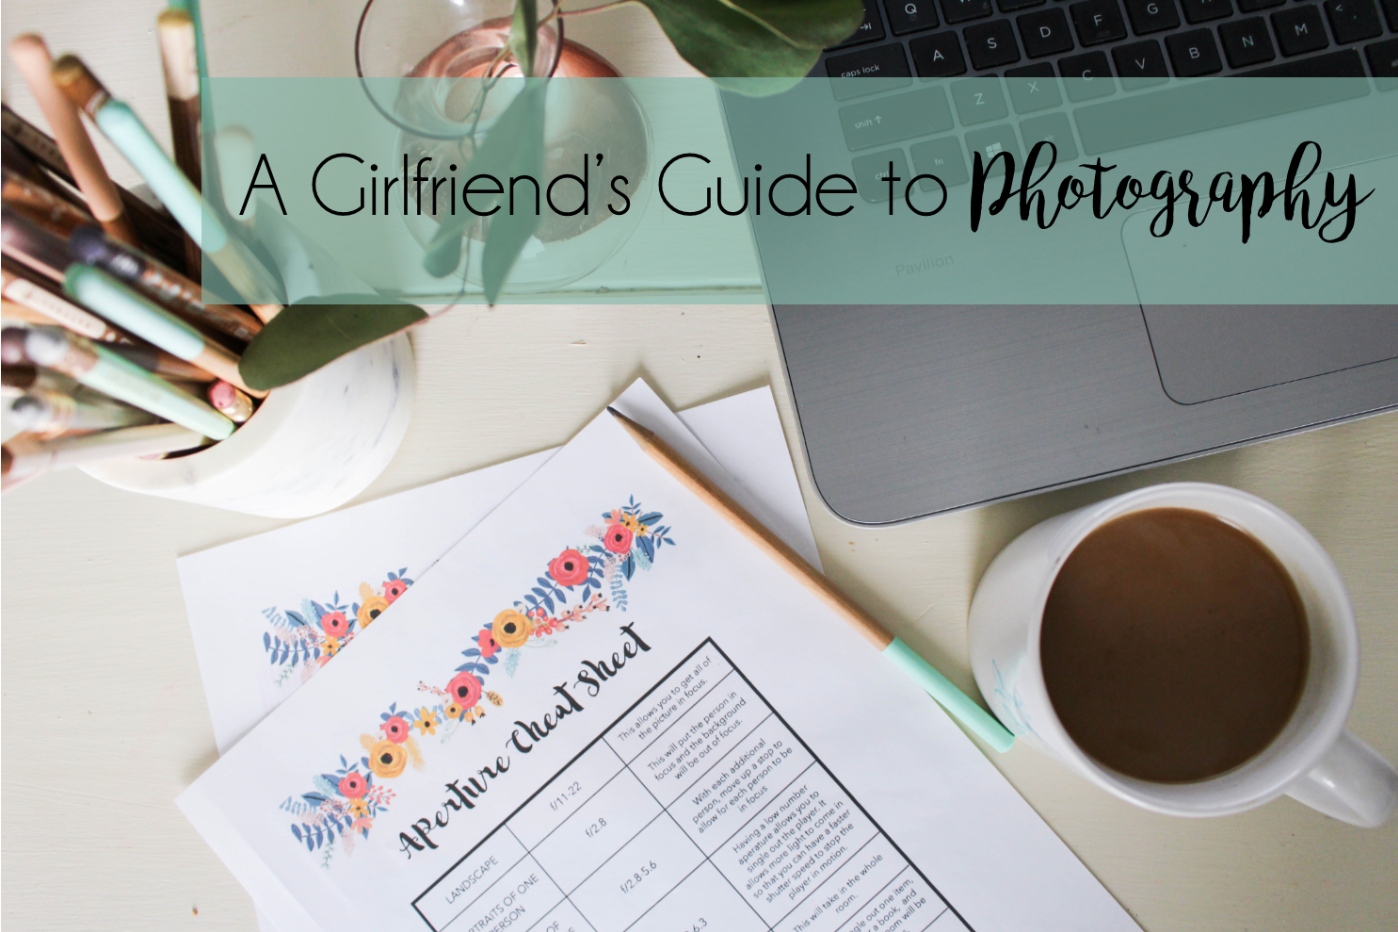 Girlfriends Guide to Photography Basics from I am michelle gifford Learn photography simply 